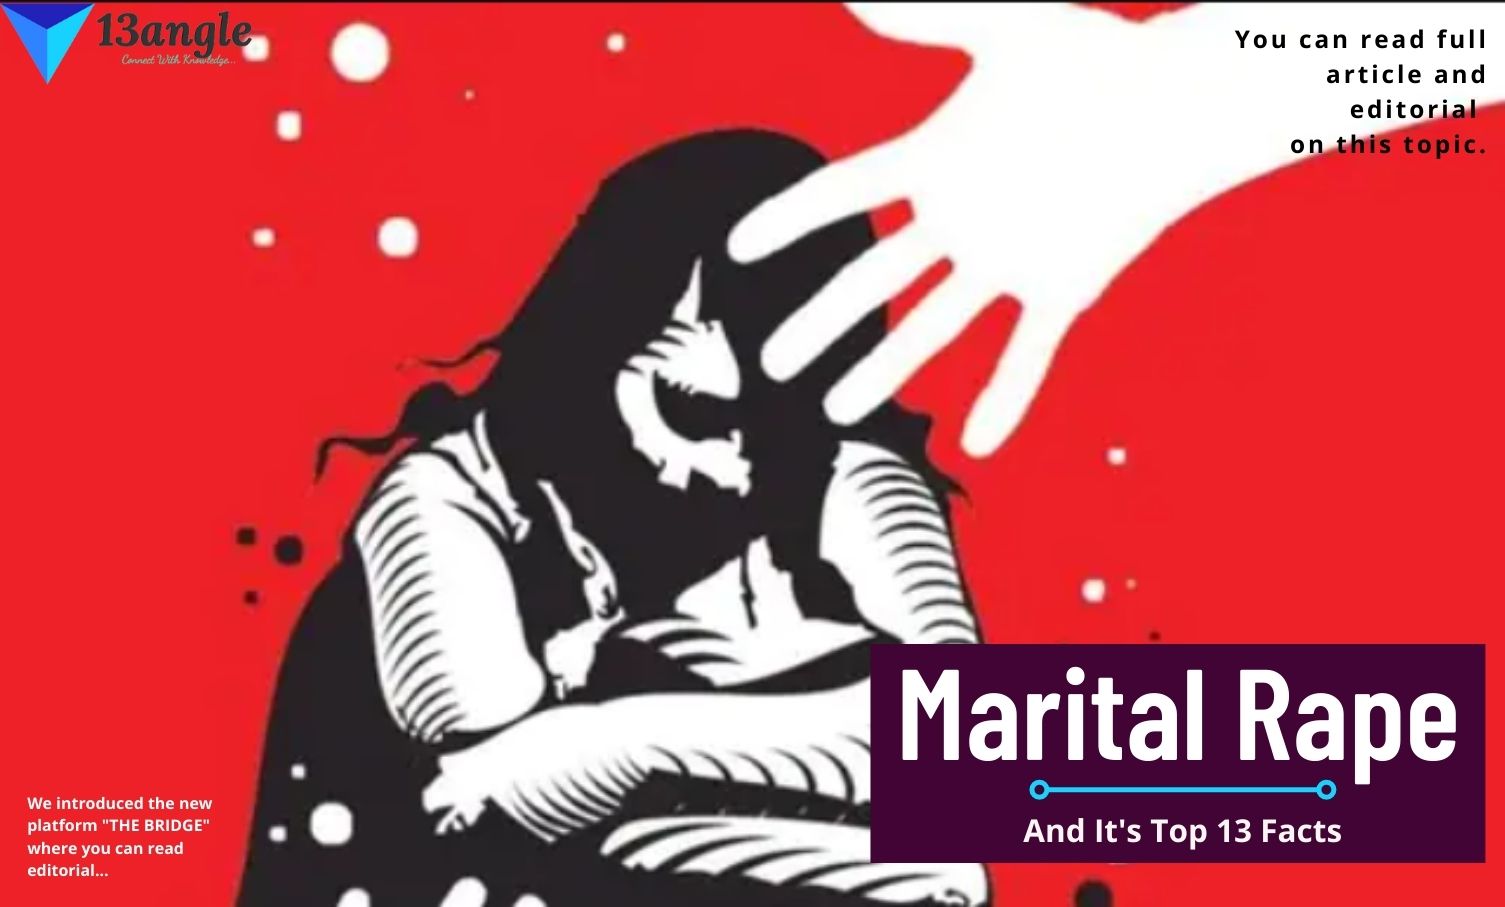 Marital Rape and its top 13 facts- 13angle